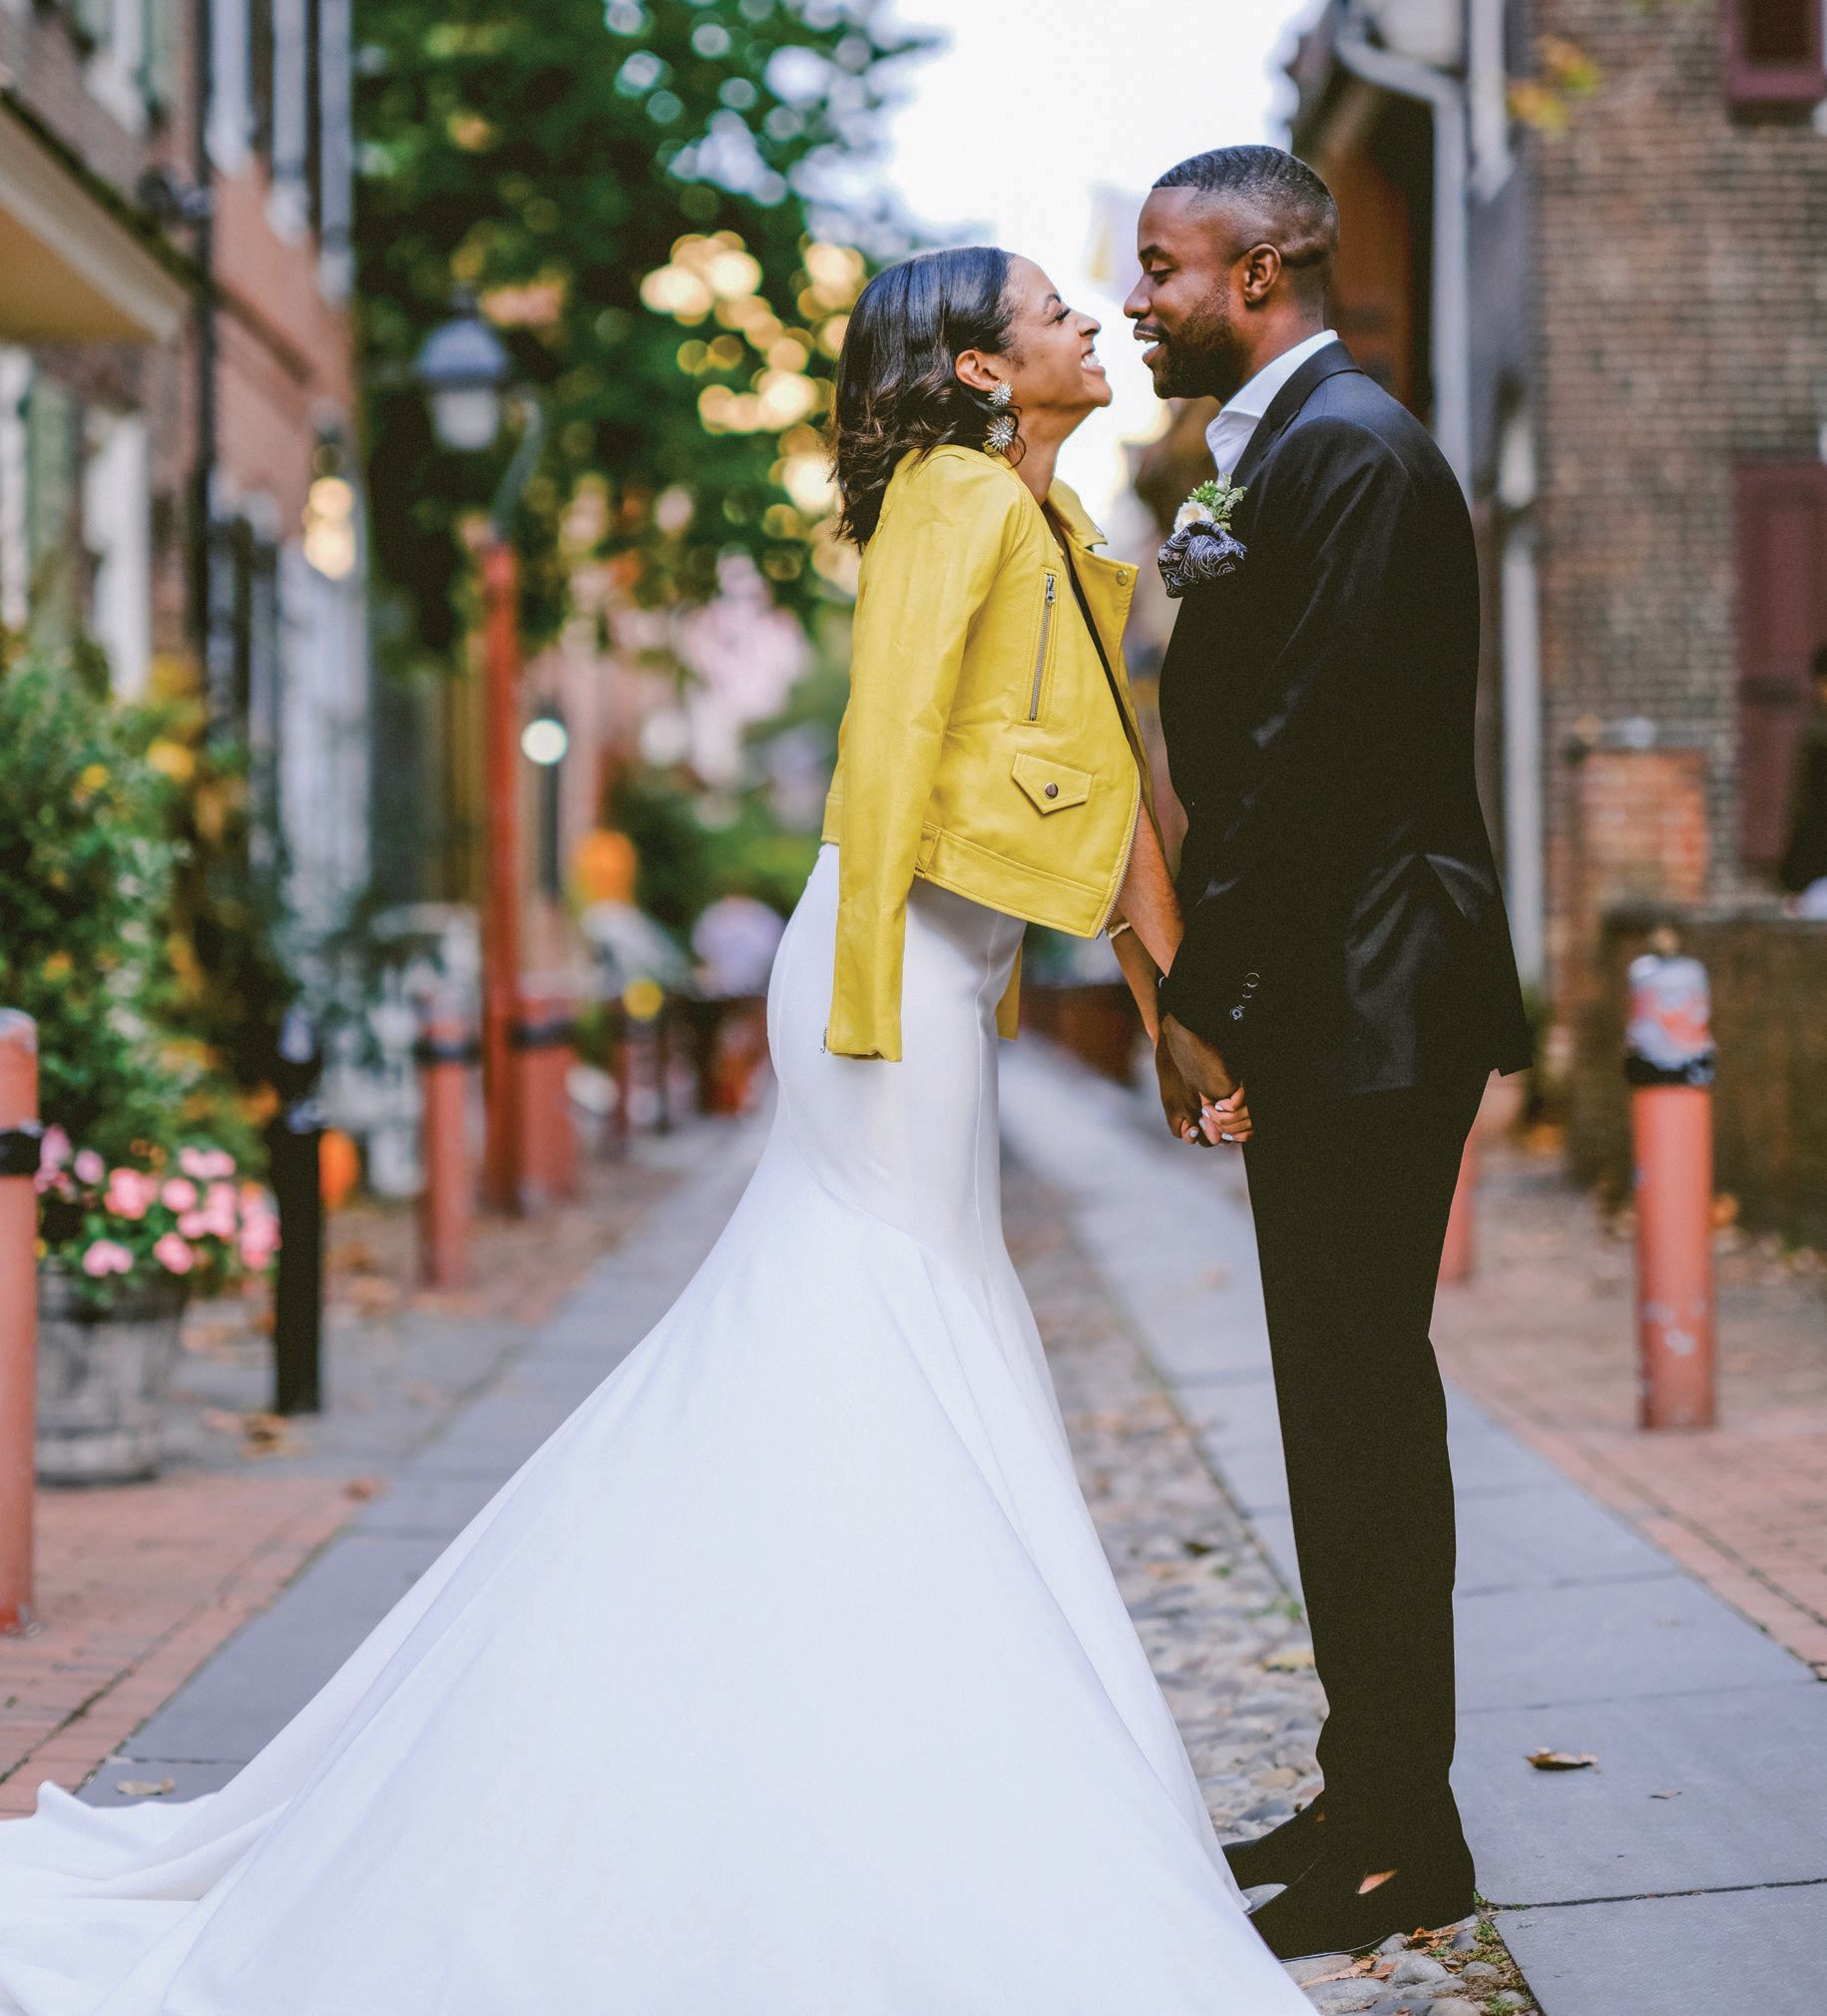 Ashley donned a yellow jacket from Love Tree for a bright pop of color.  Photographed by Alison Conklin Photography